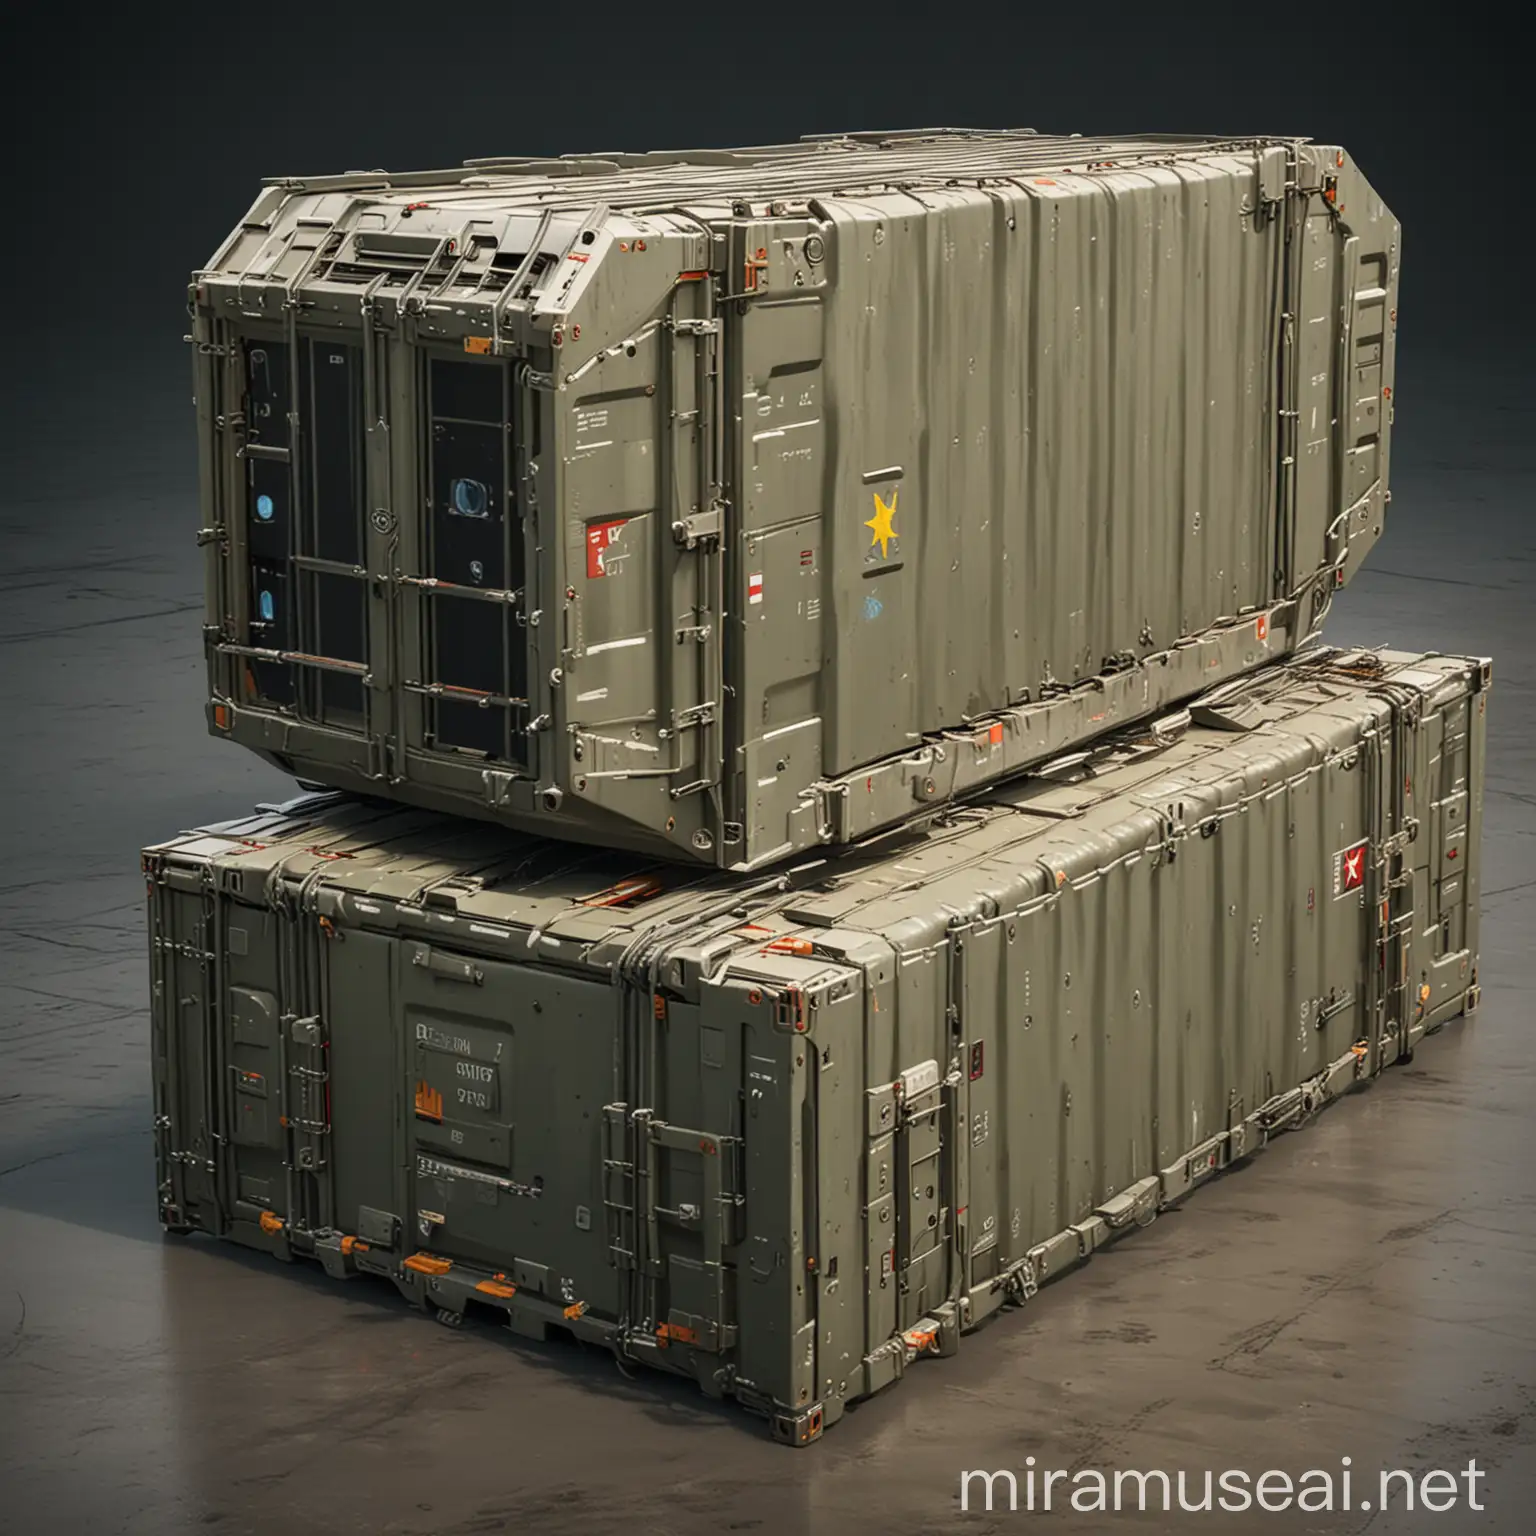 futuristic cargo conteiner for military and emergency usage that can open from sides with 5 openable doors

